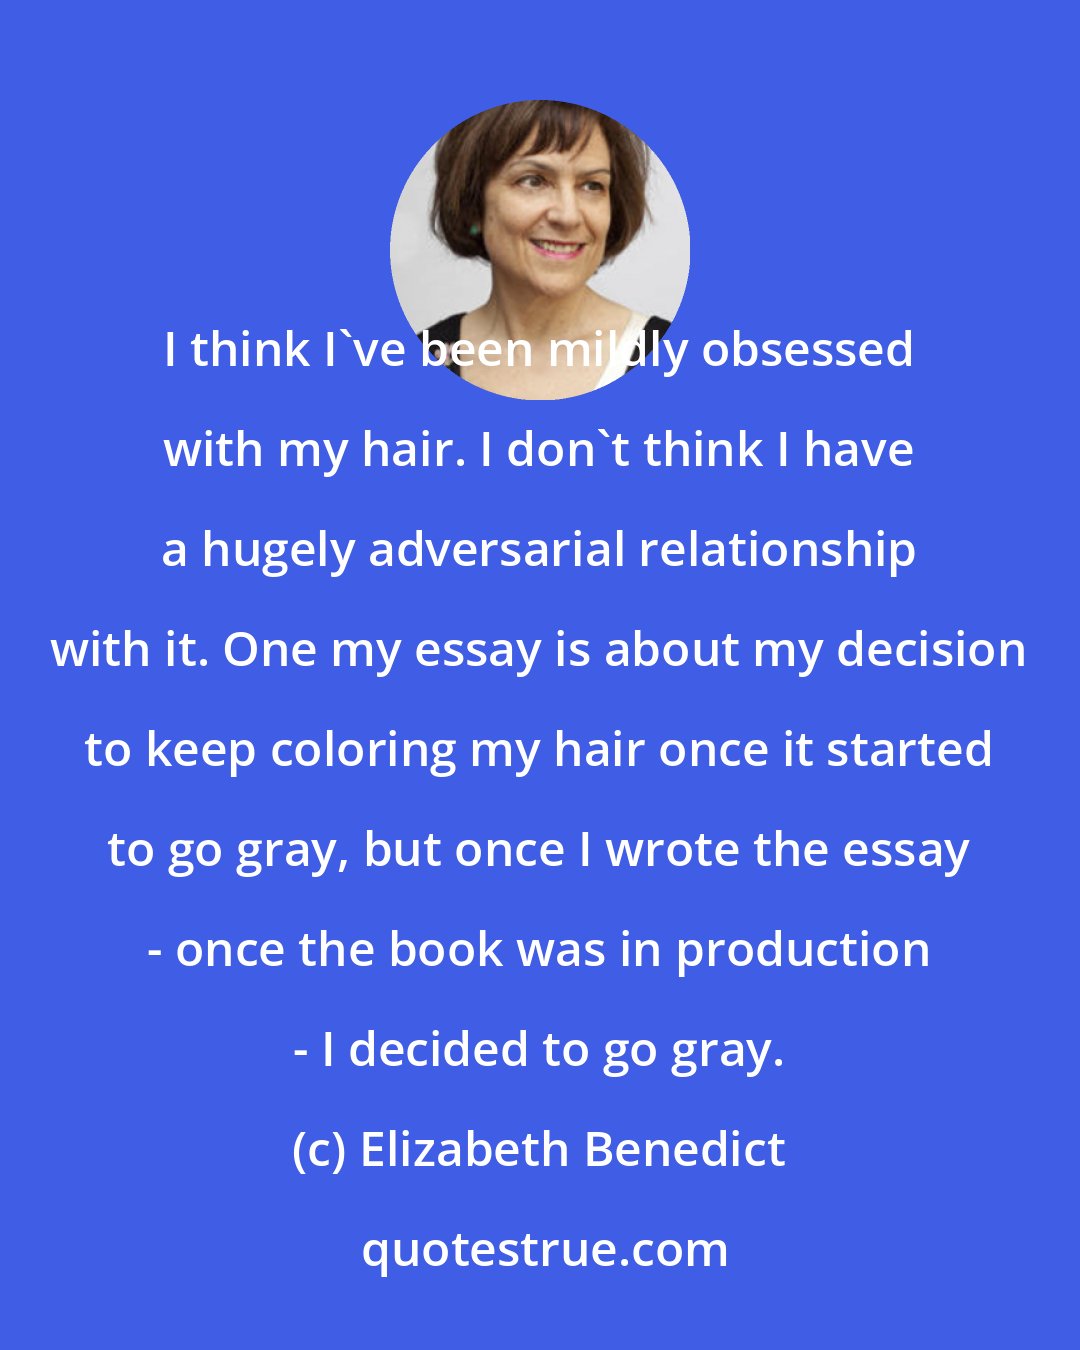 Elizabeth Benedict: I think I've been mildly obsessed with my hair. I don't think I have a hugely adversarial relationship with it. One my essay is about my decision to keep coloring my hair once it started to go gray, but once I wrote the essay - once the book was in production - I decided to go gray.